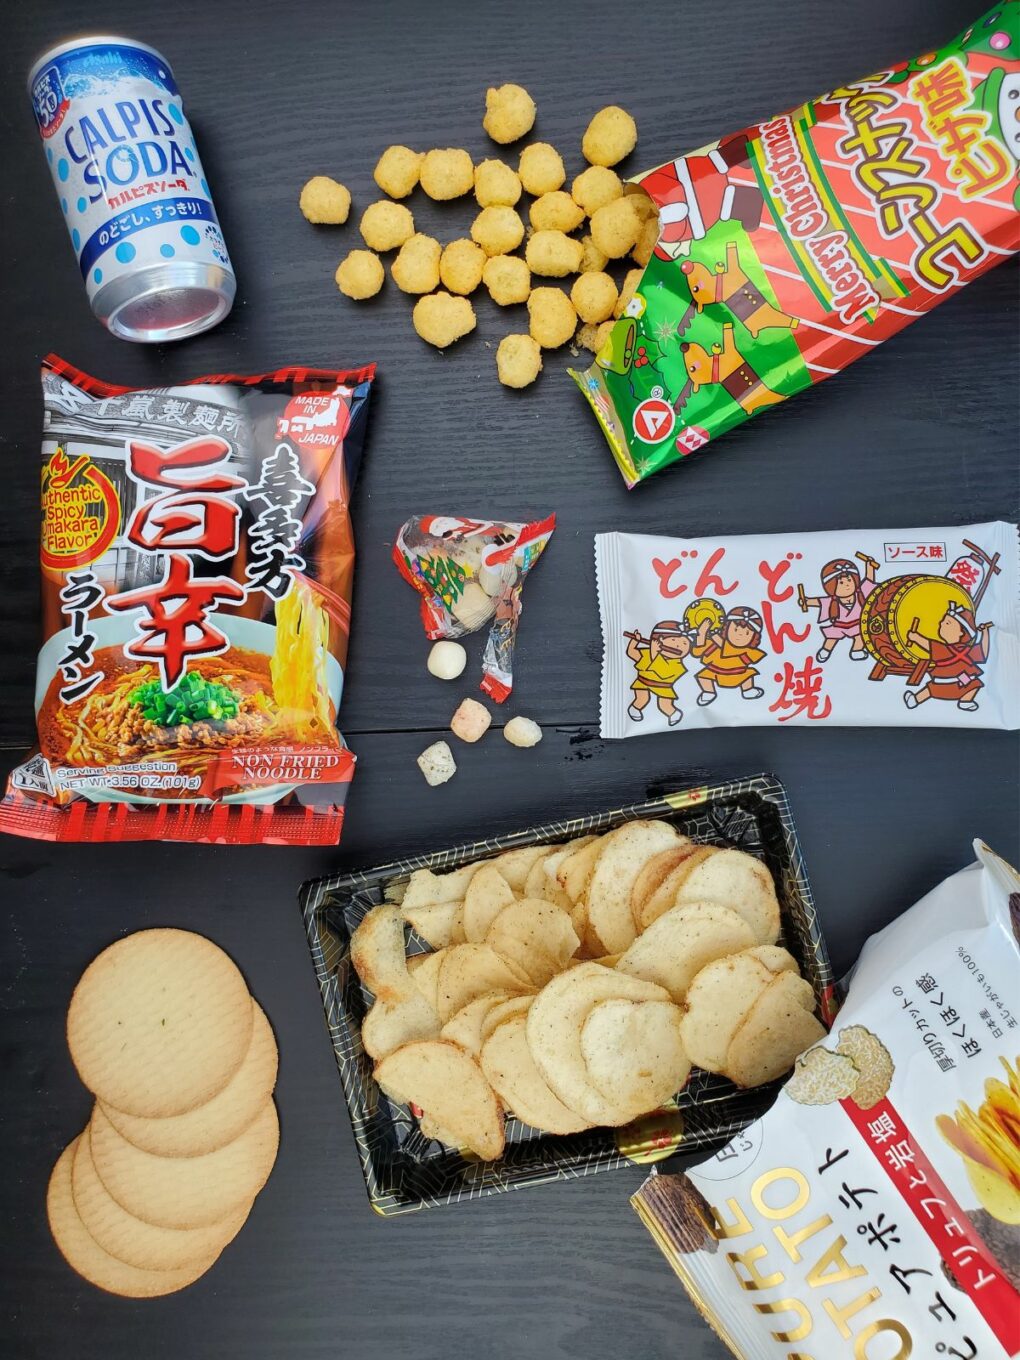 all of the savory tokyo treats snacks laid out on the table, some of them unwrapped.